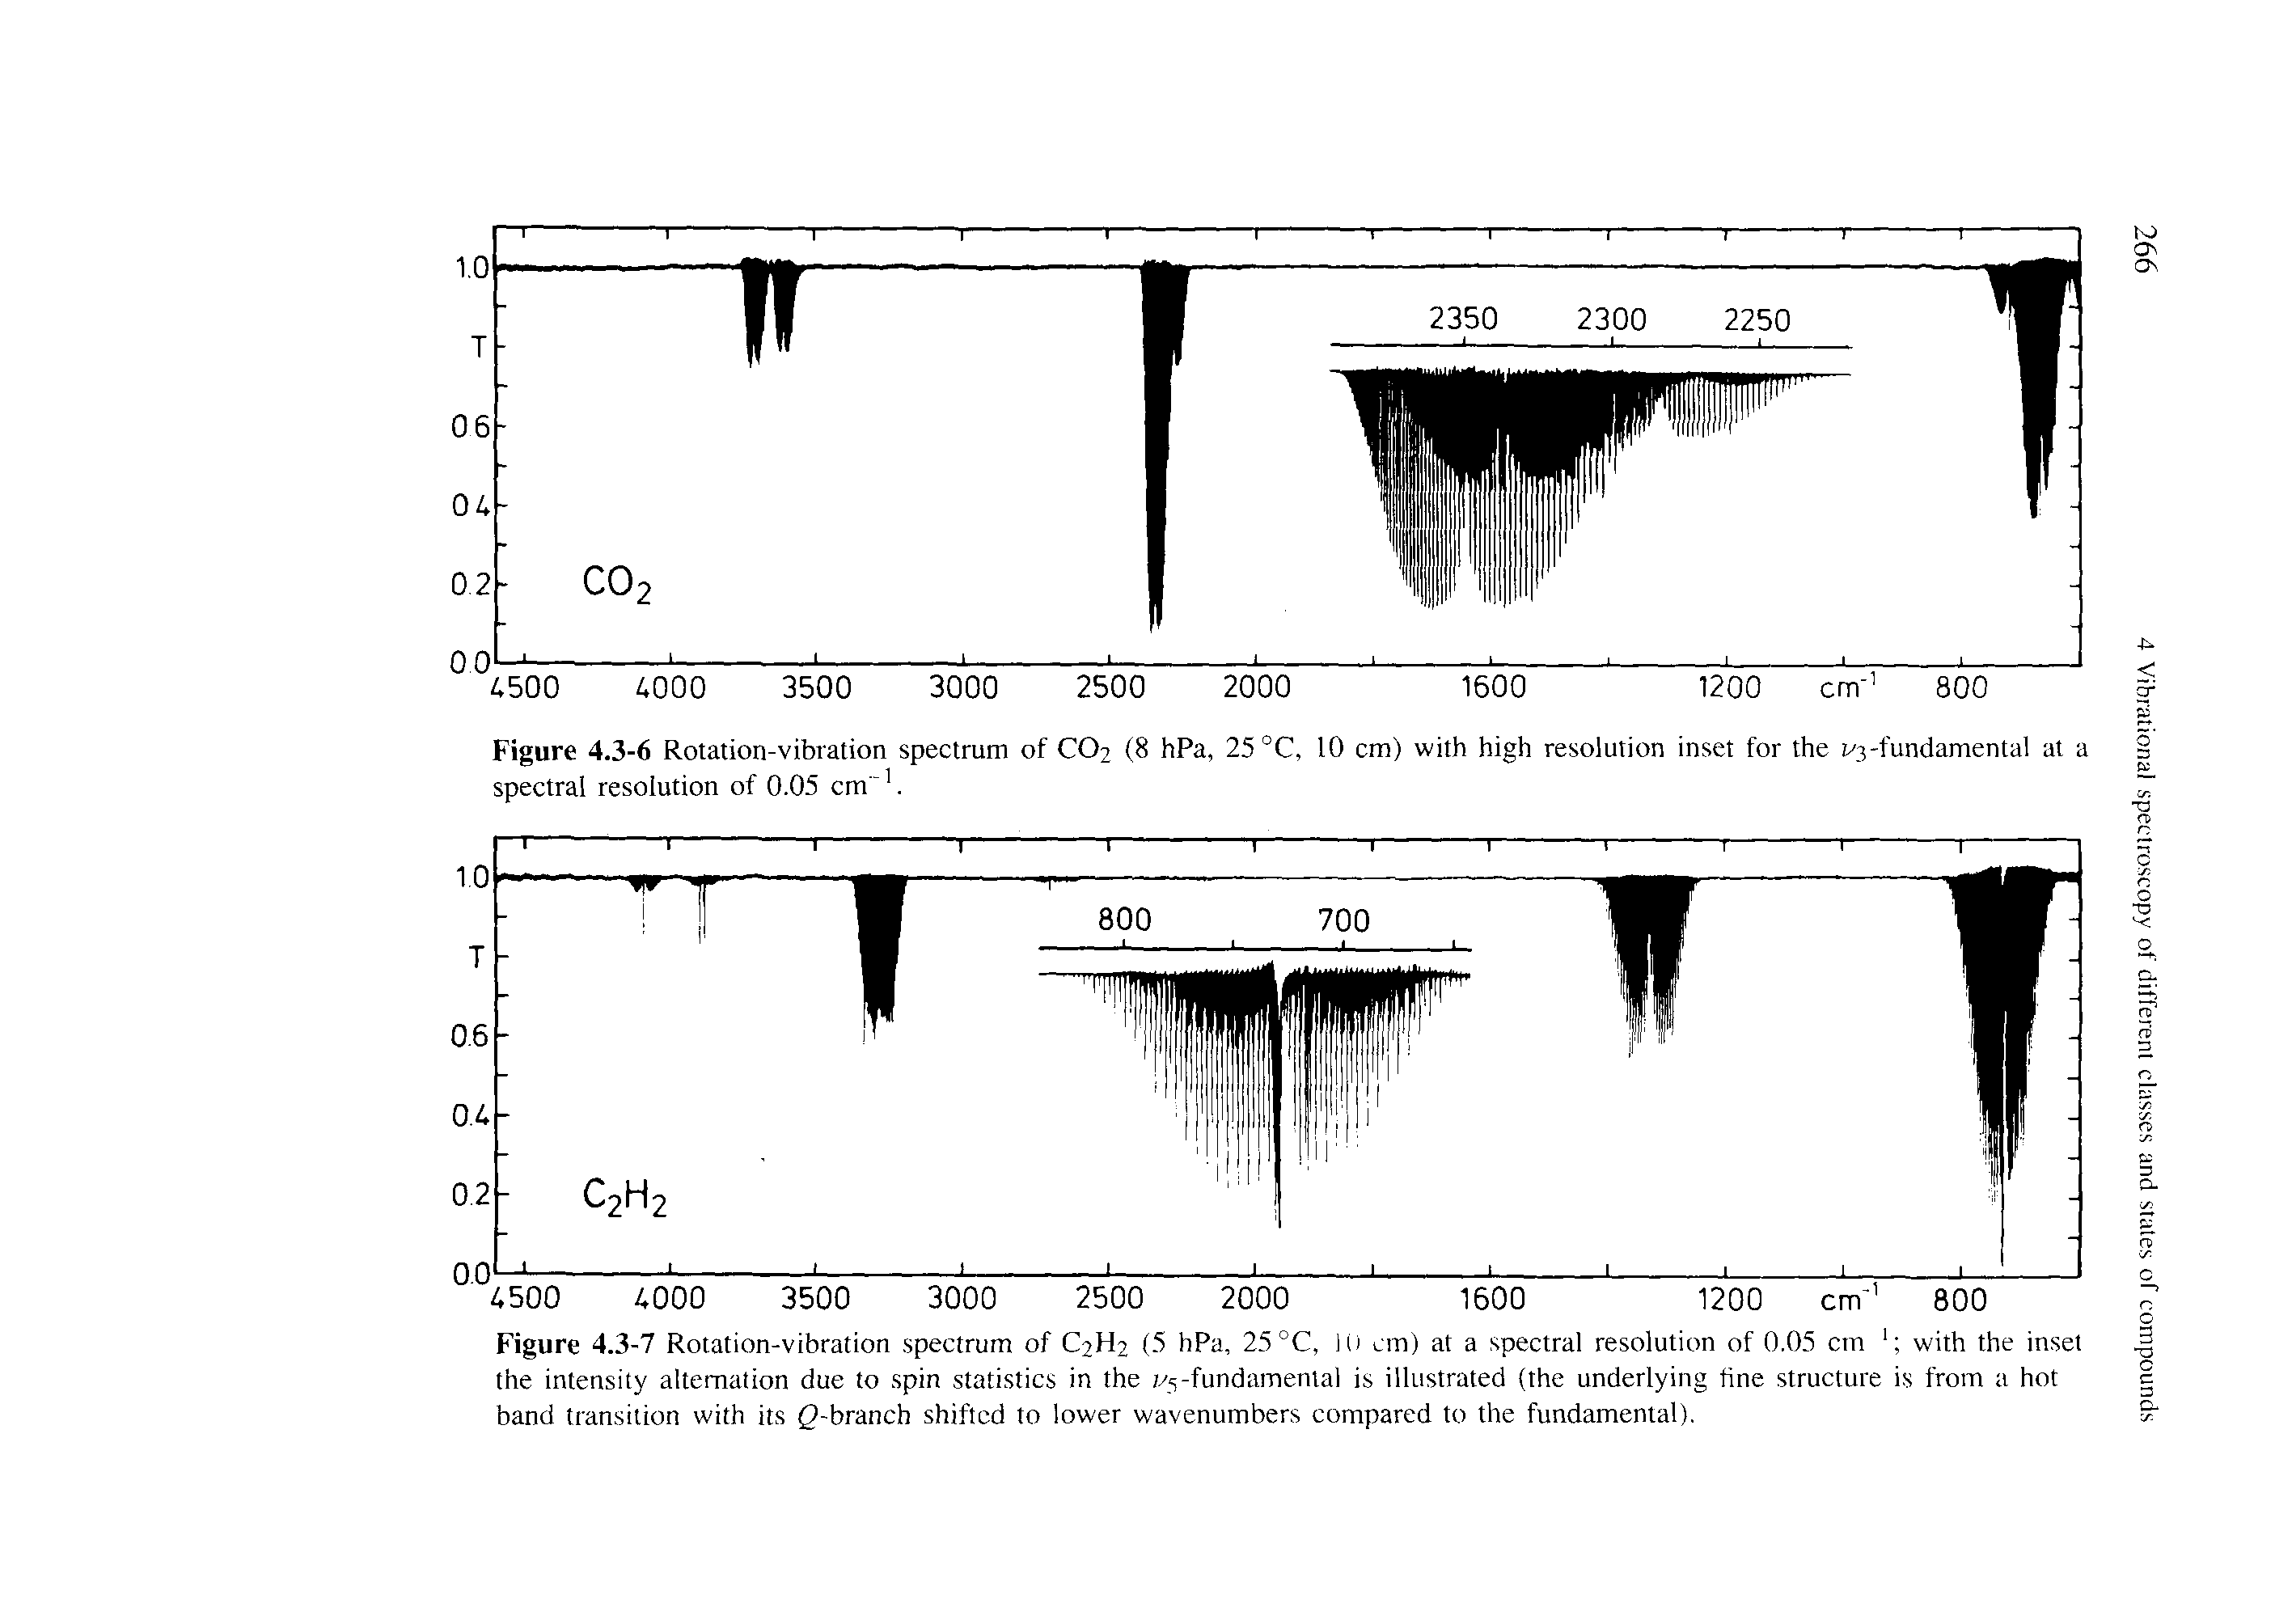 Figure 4.3-7 Rotation-vibration spectrum of C2H2 (5 hPa, 25 °C, l(i cm) at a spectral resolution of 0,05 cm with the inset the intensity alternation due to spin statistics in the /5-fundamenlal is illustrated (the underlying fine structure is from a hot band transition with its 0-branch shifted to lower wavenumbers compared to the fundamental).